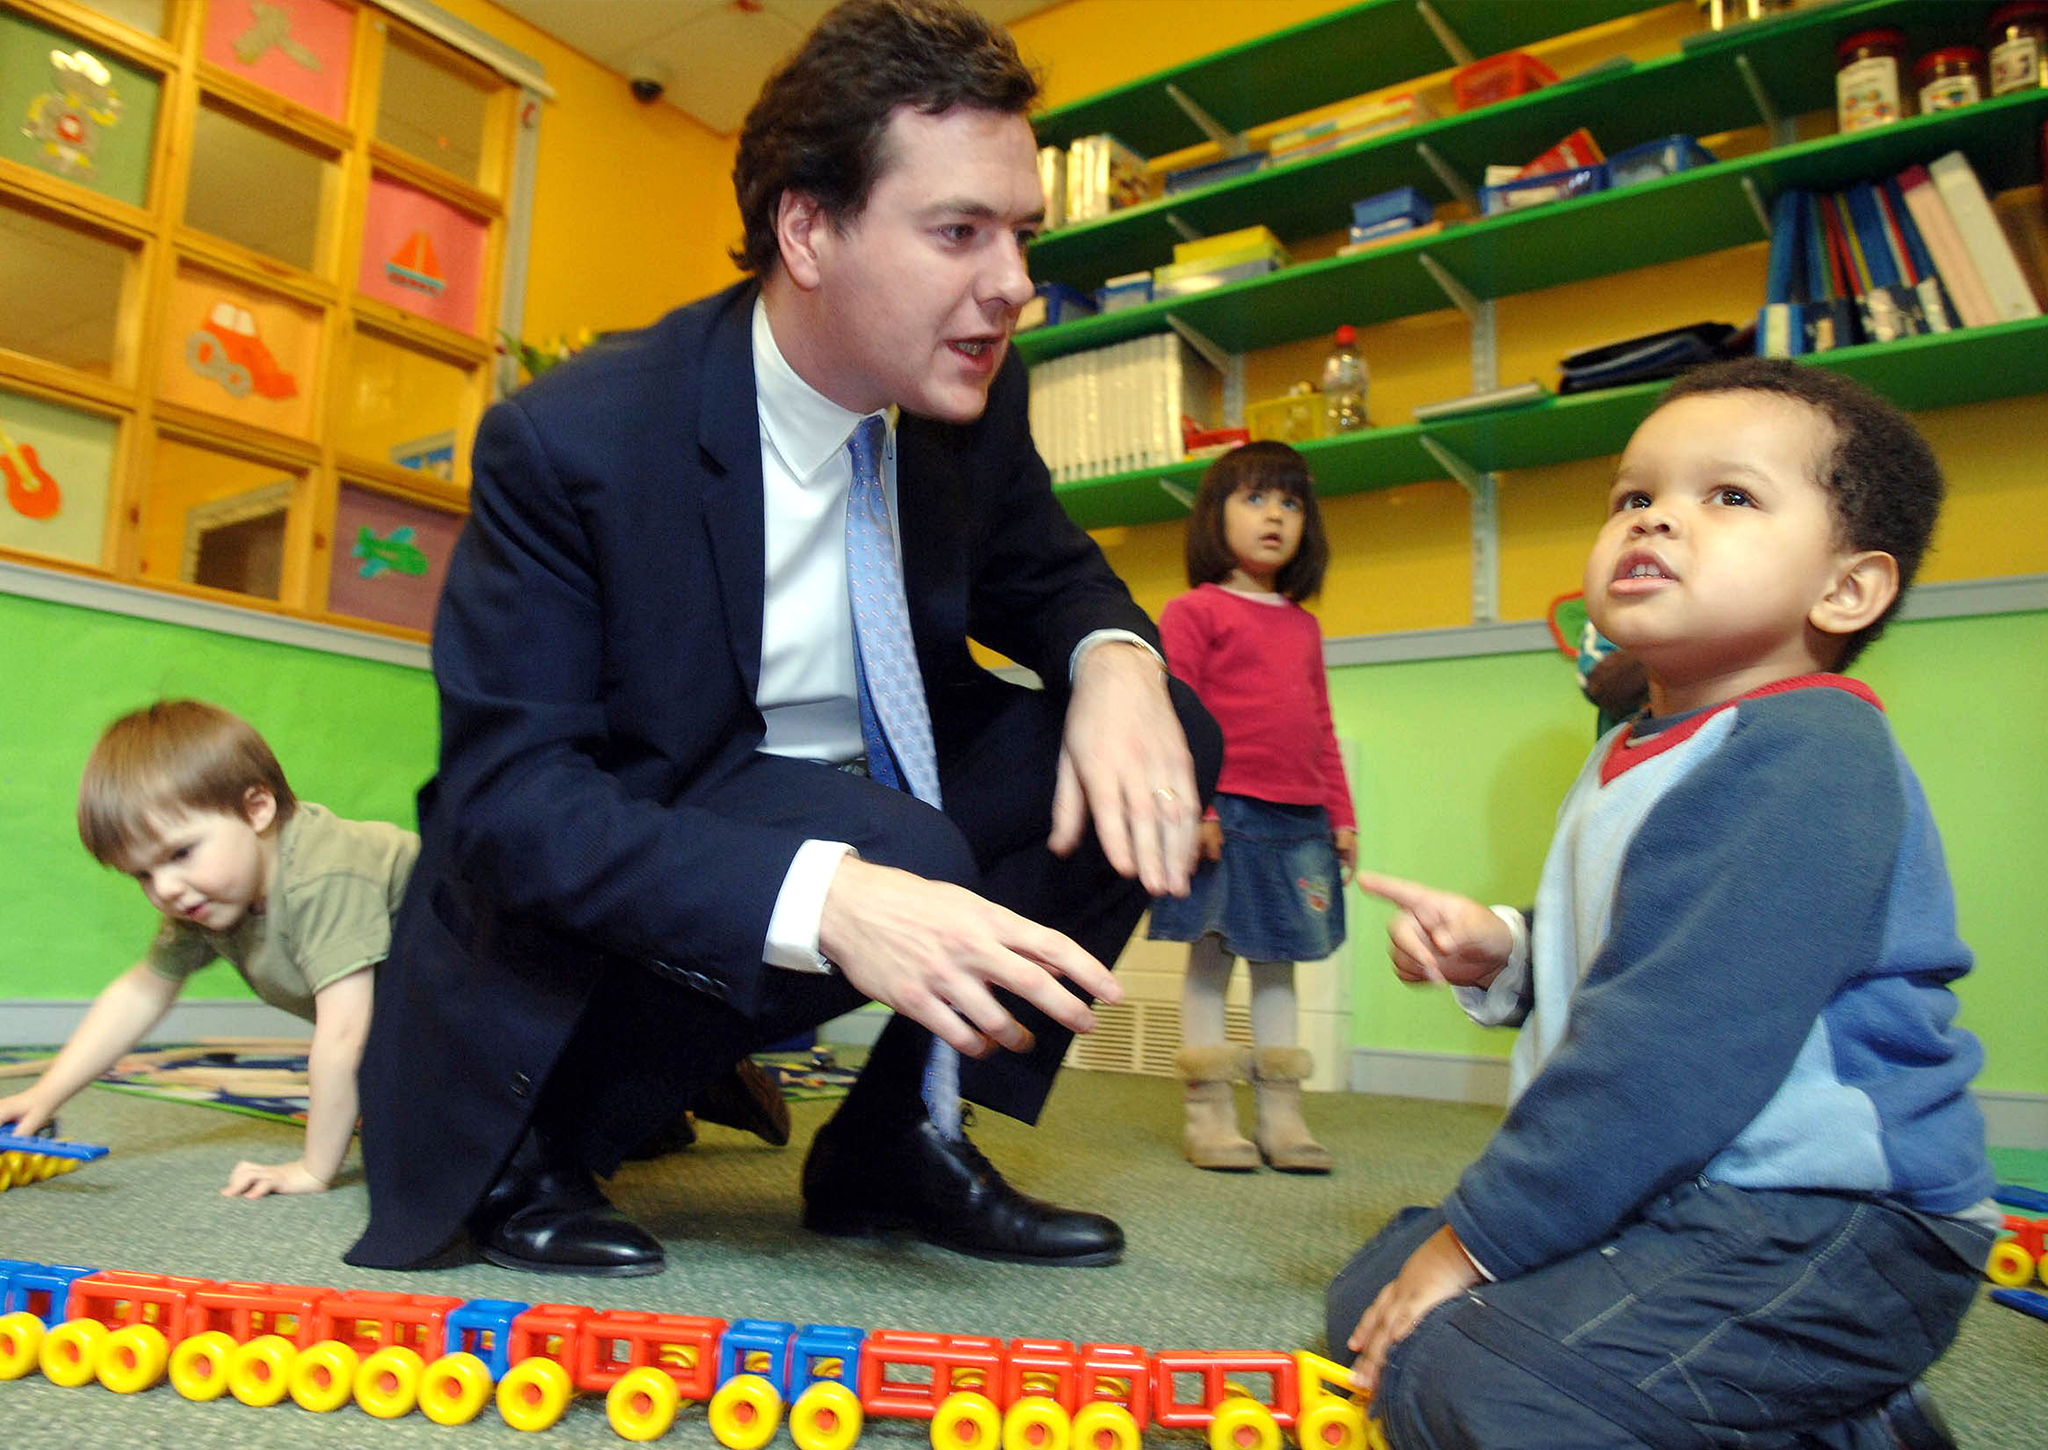 The Chancellor and a child